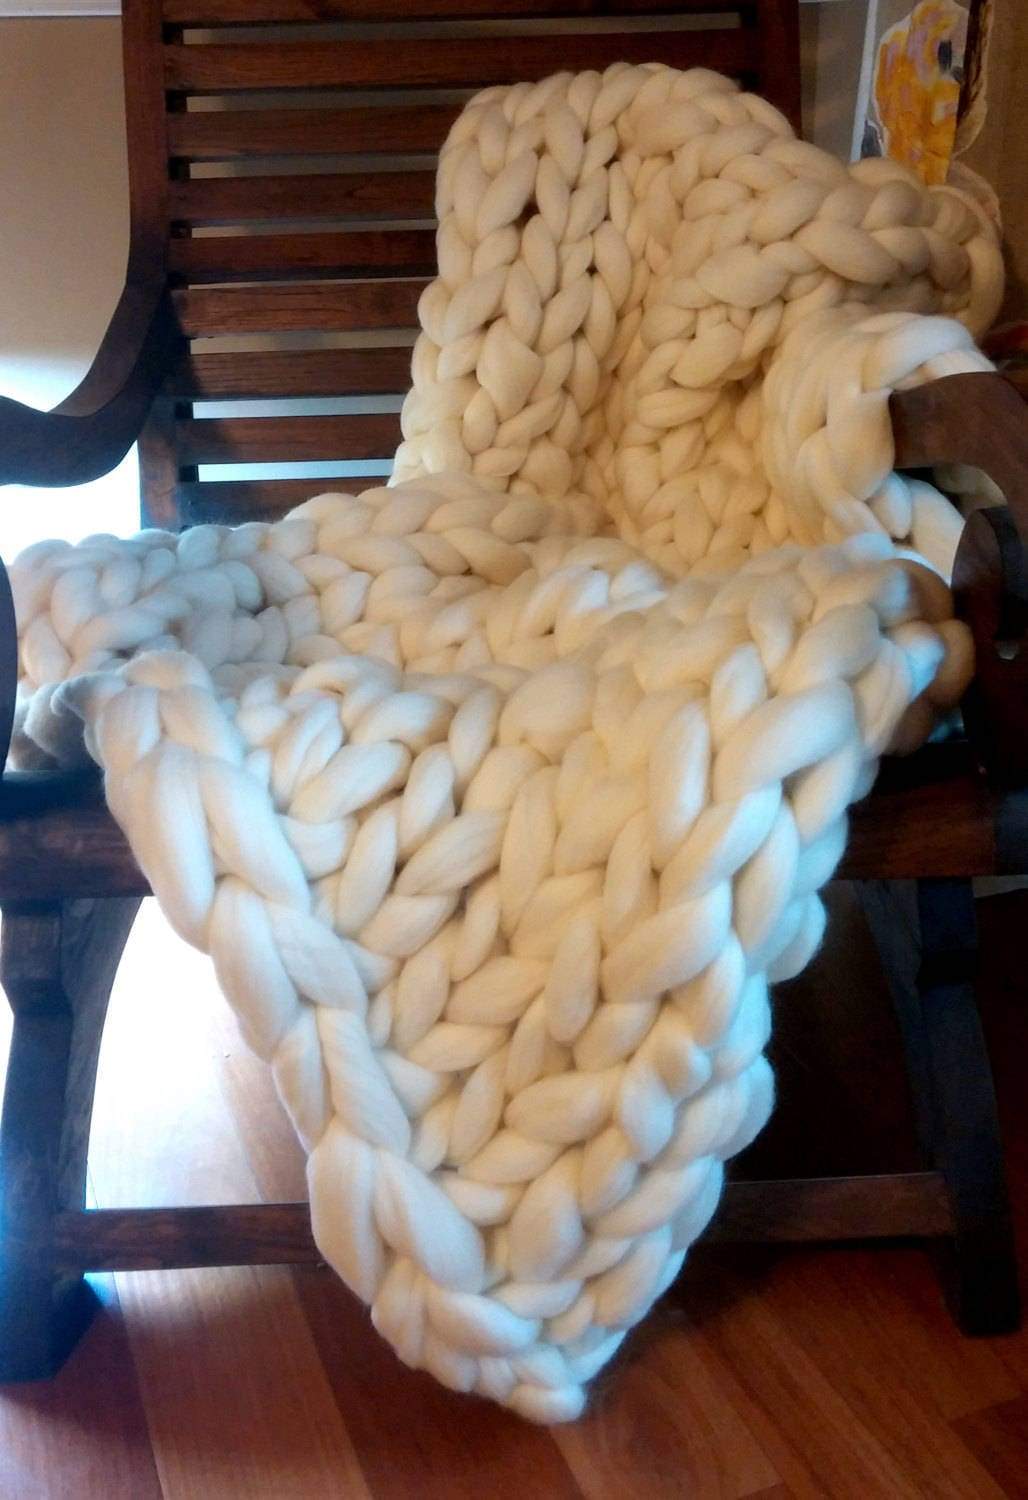 Mothers Day Gift! Chunky Knit Blanket, Chunky Knit Merino Wool Blanket Large 40" x 60" Throw Blanket, Giant Knit Blanket, Bulky Knit Blanket